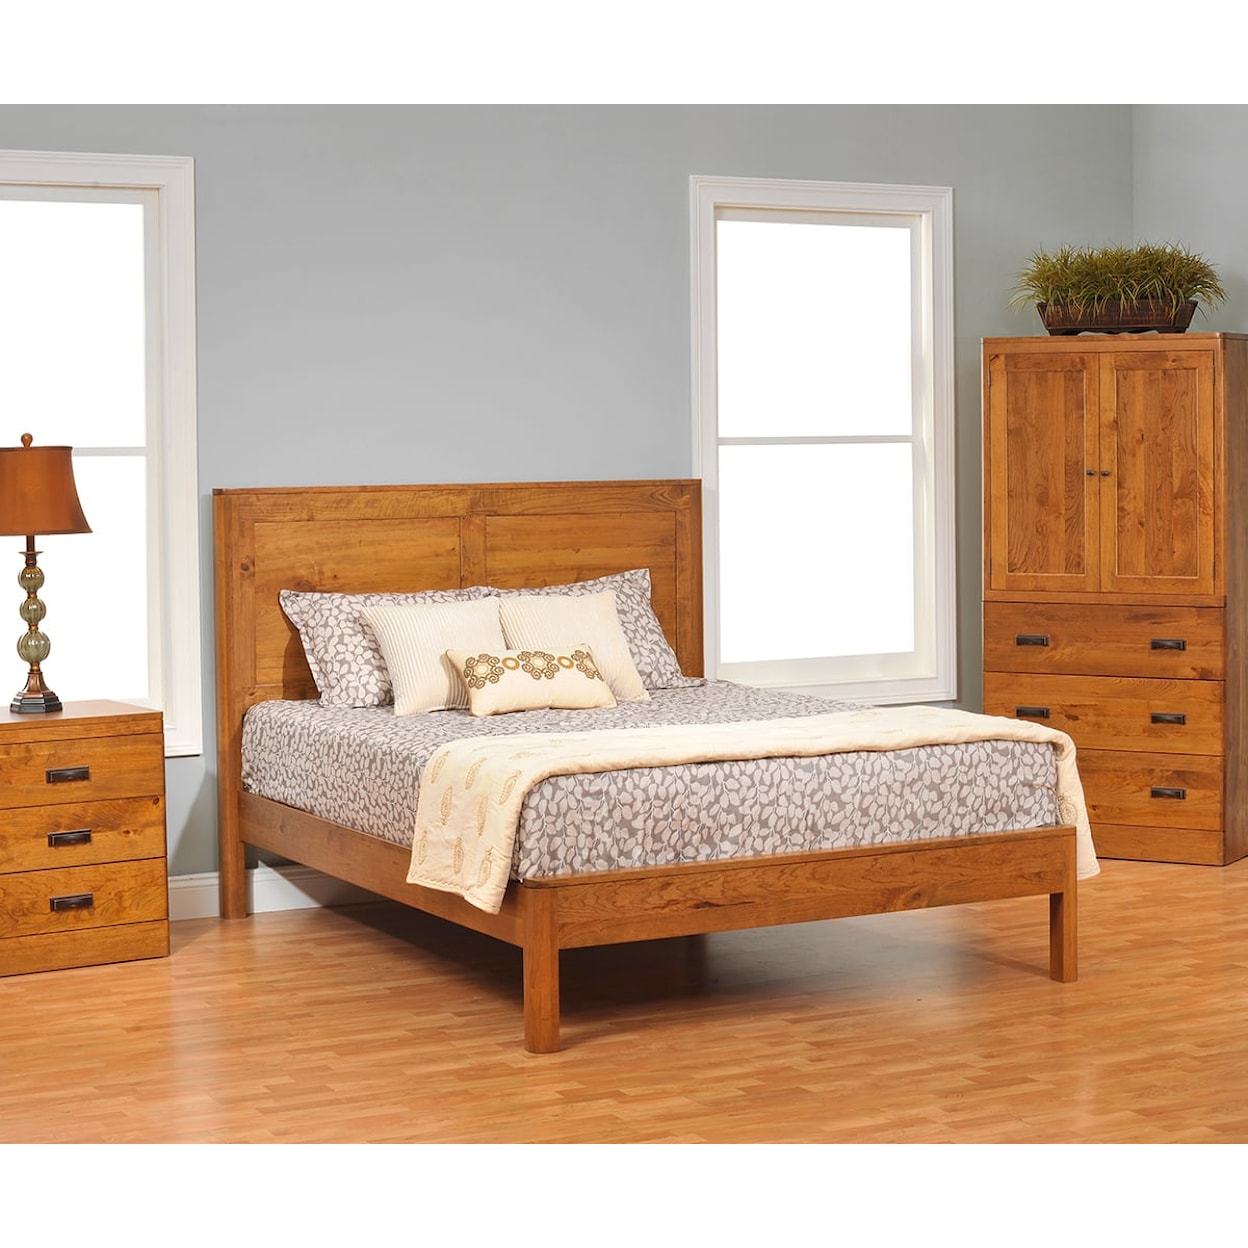 Millcraft Crossan King Panel Bed